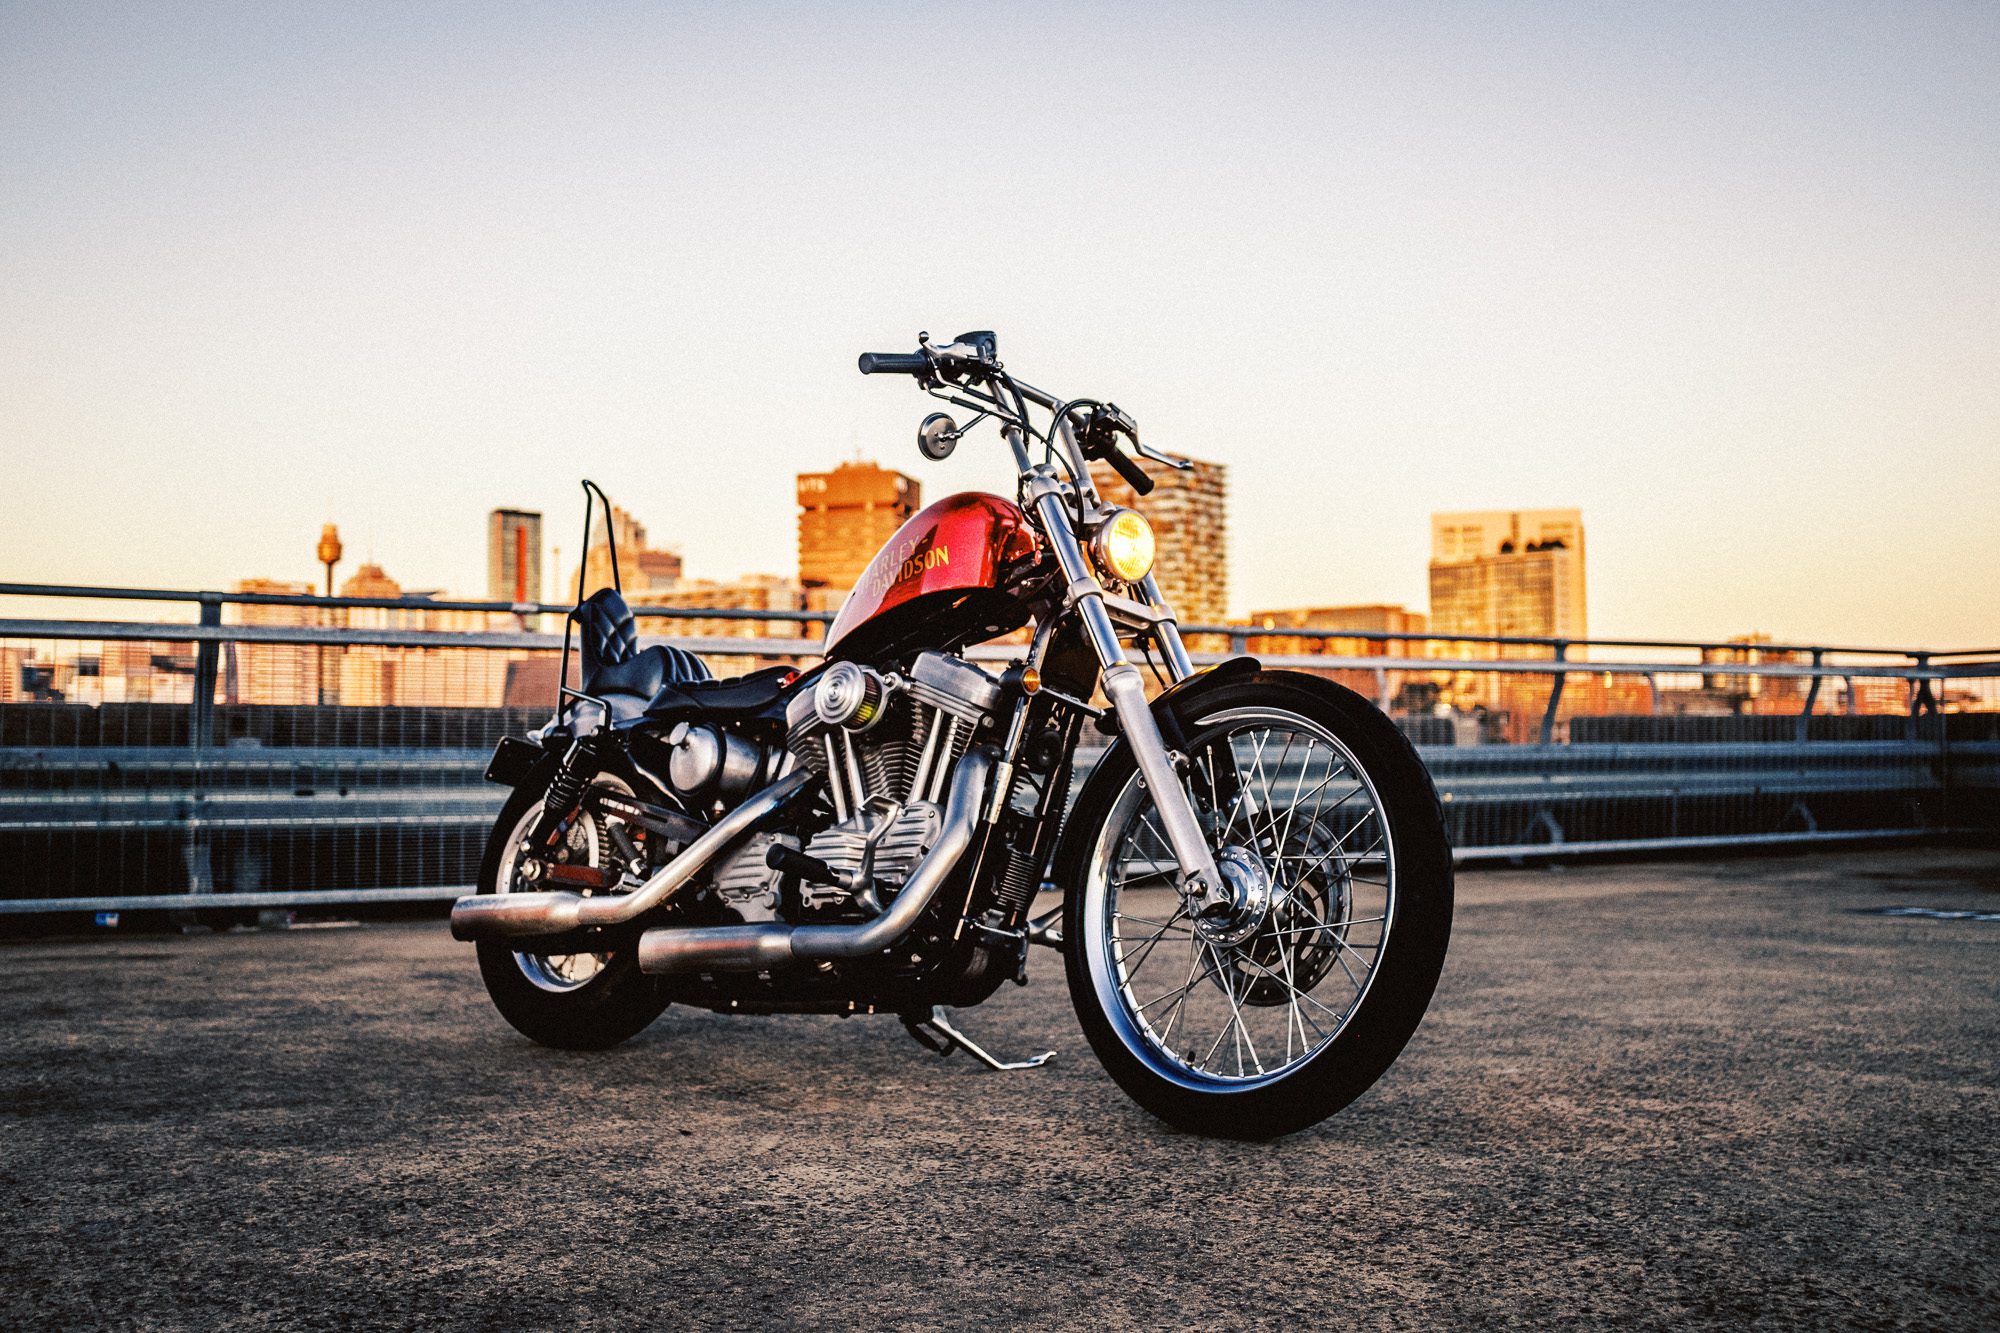 Right side view of custom Harley-Davidson XLH chopper on Sydney rooftop at sunset